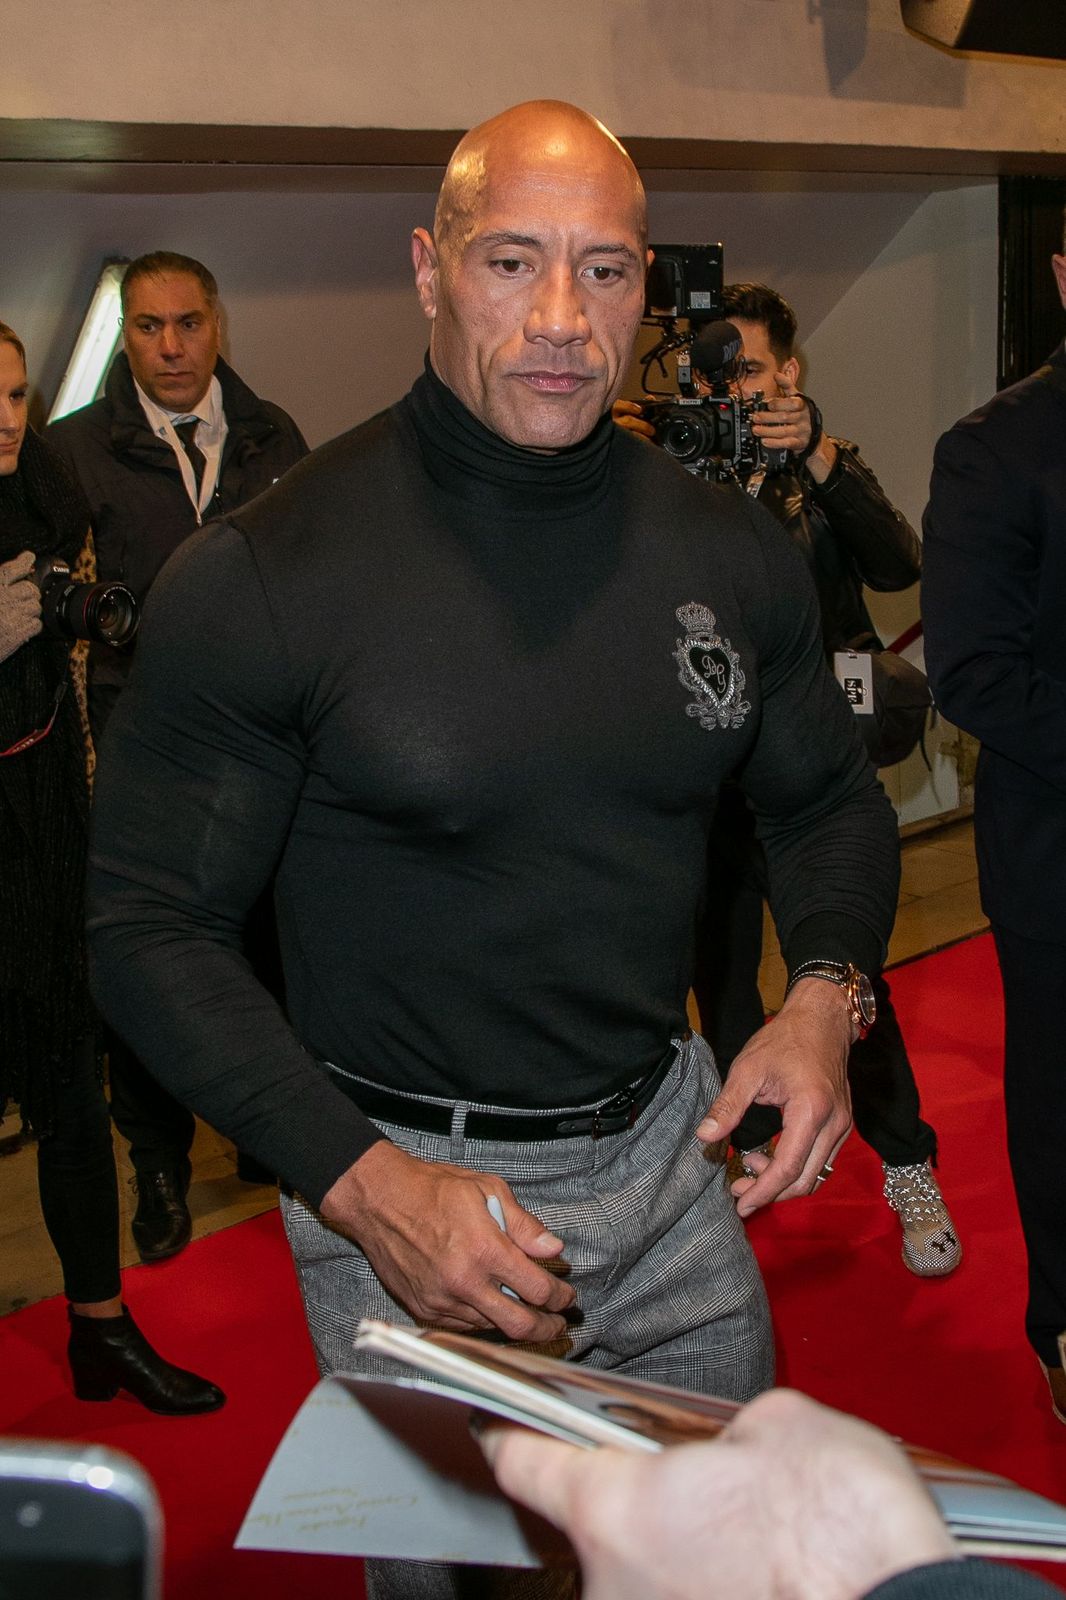 Dwayne Johnson at the "Jumanji: Next Level" premiere on December 3, 2019, in Paris, France. | Photo: Getty Images